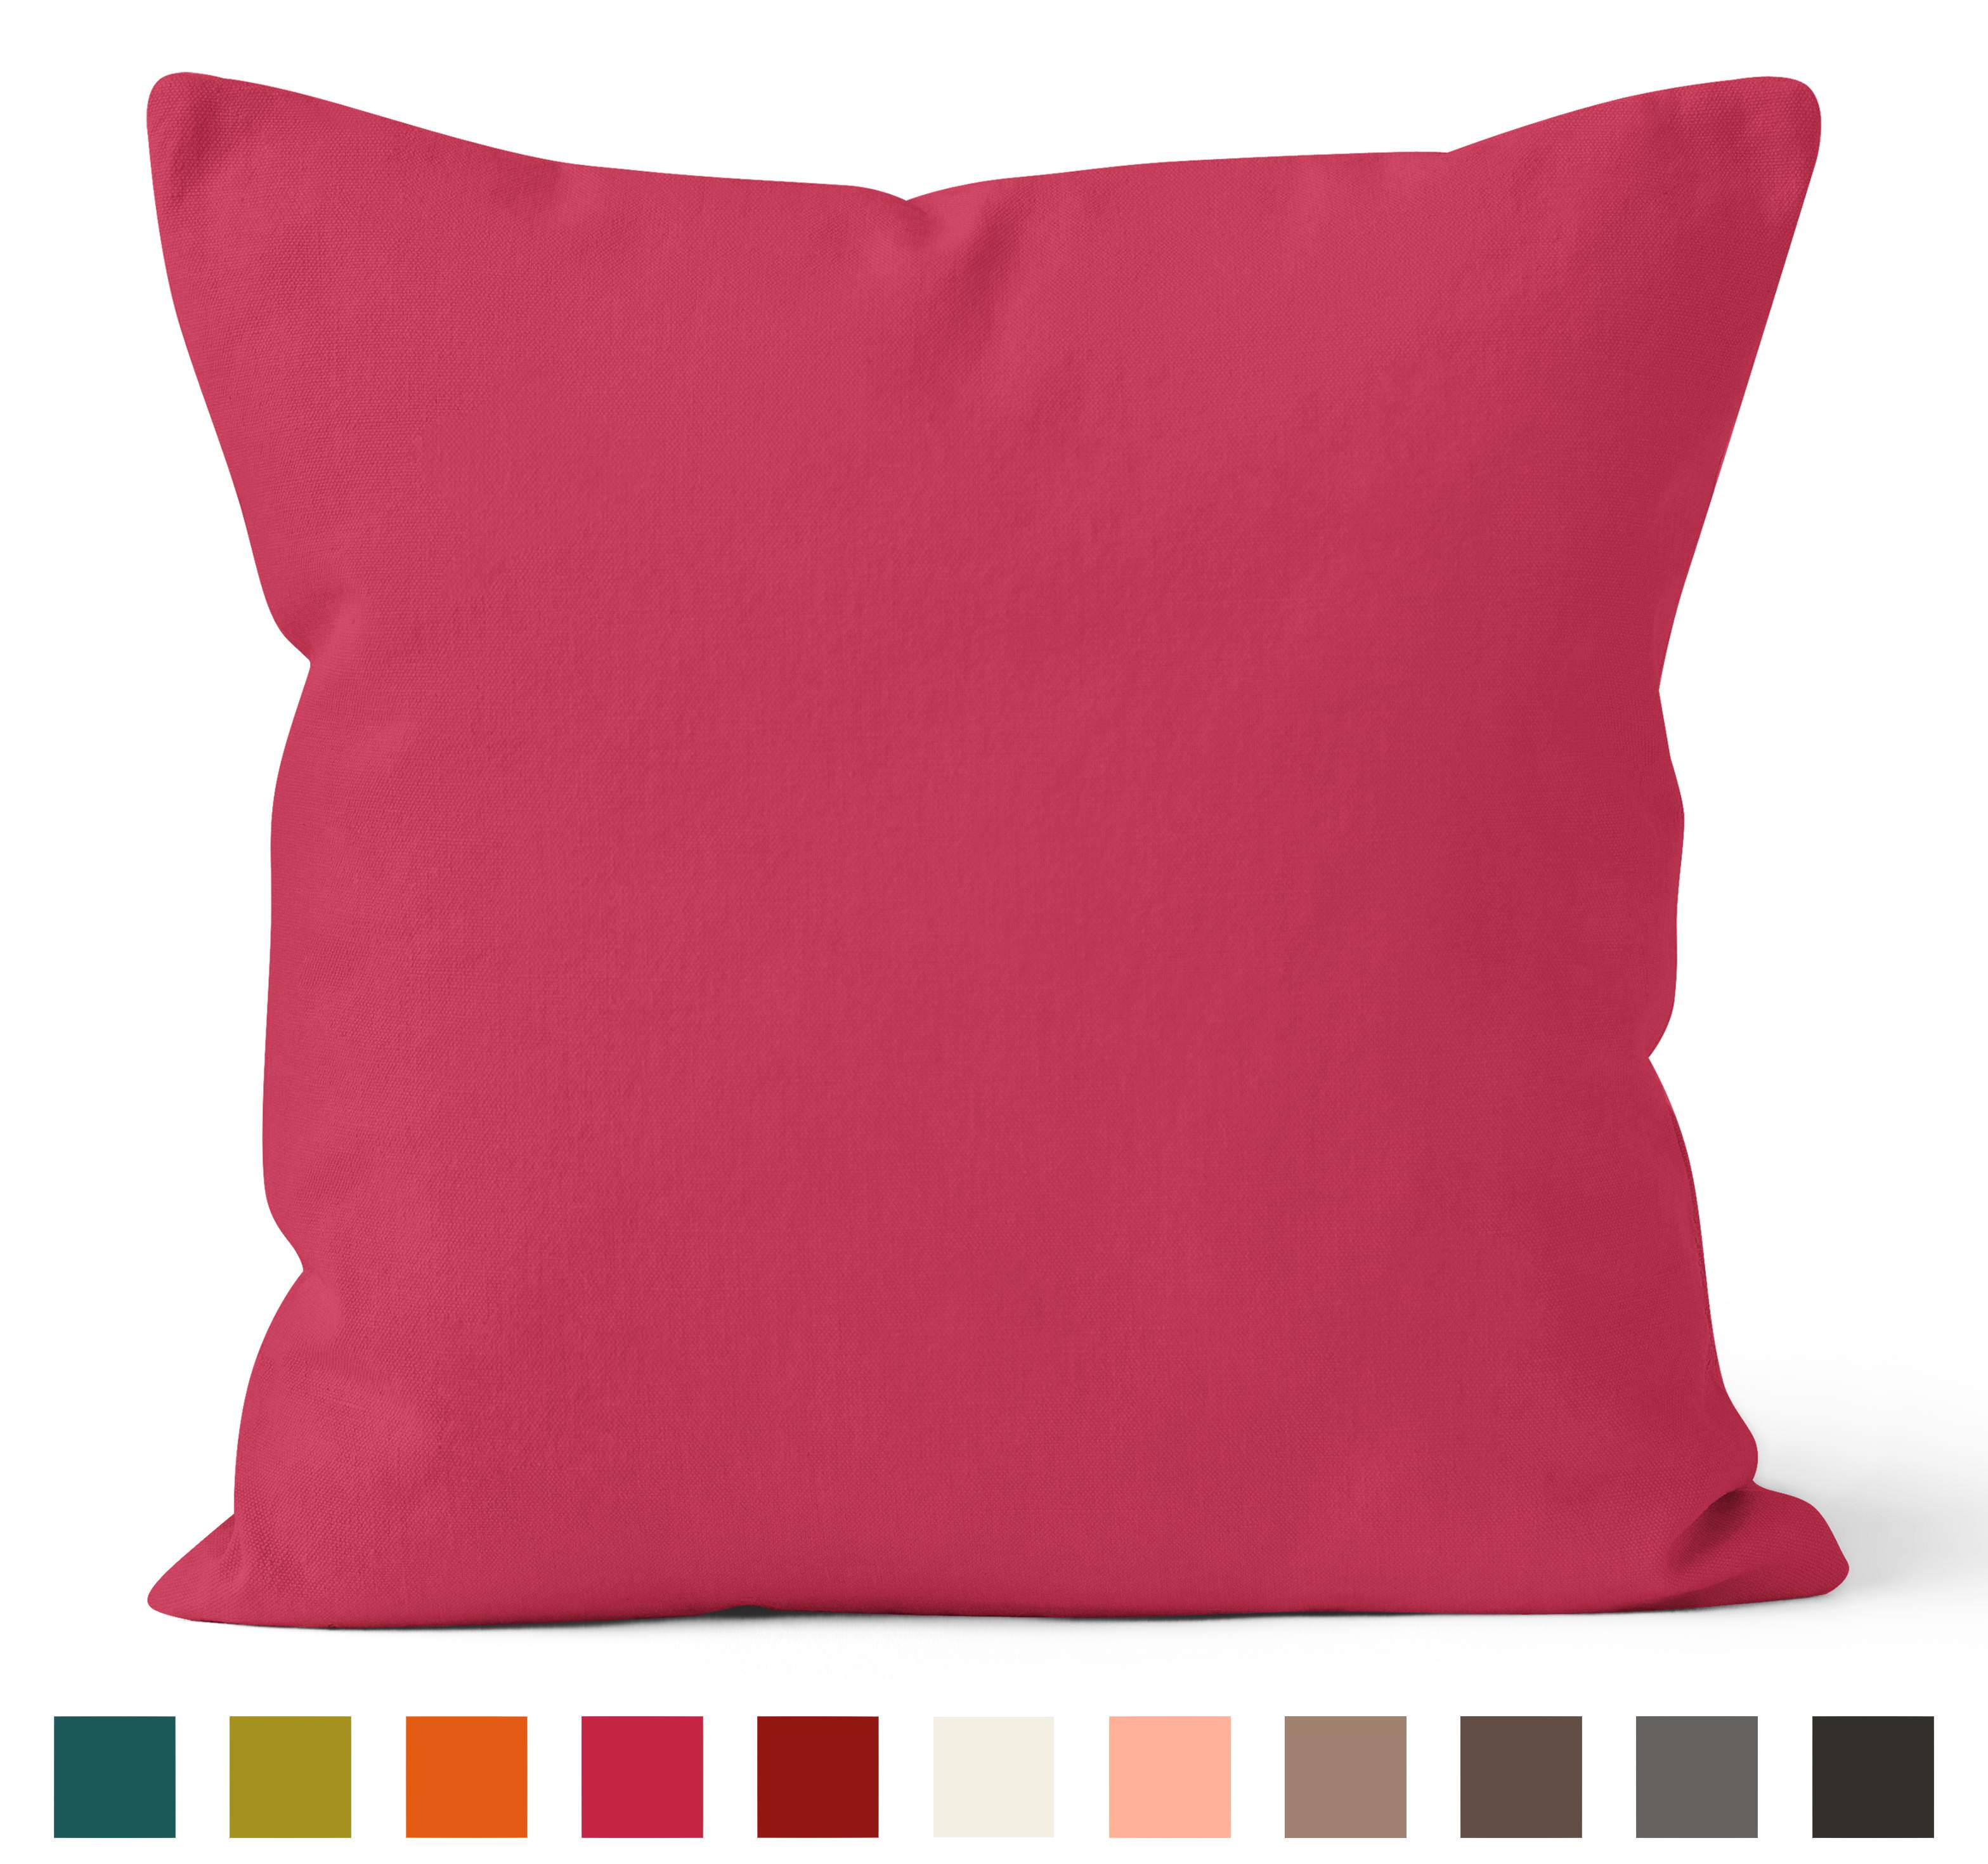 Encasa Homes Dyed Cotton Canvas Cushion Cover (Choose with or without fillers) - 30x30 cm, Fuchsia Pink